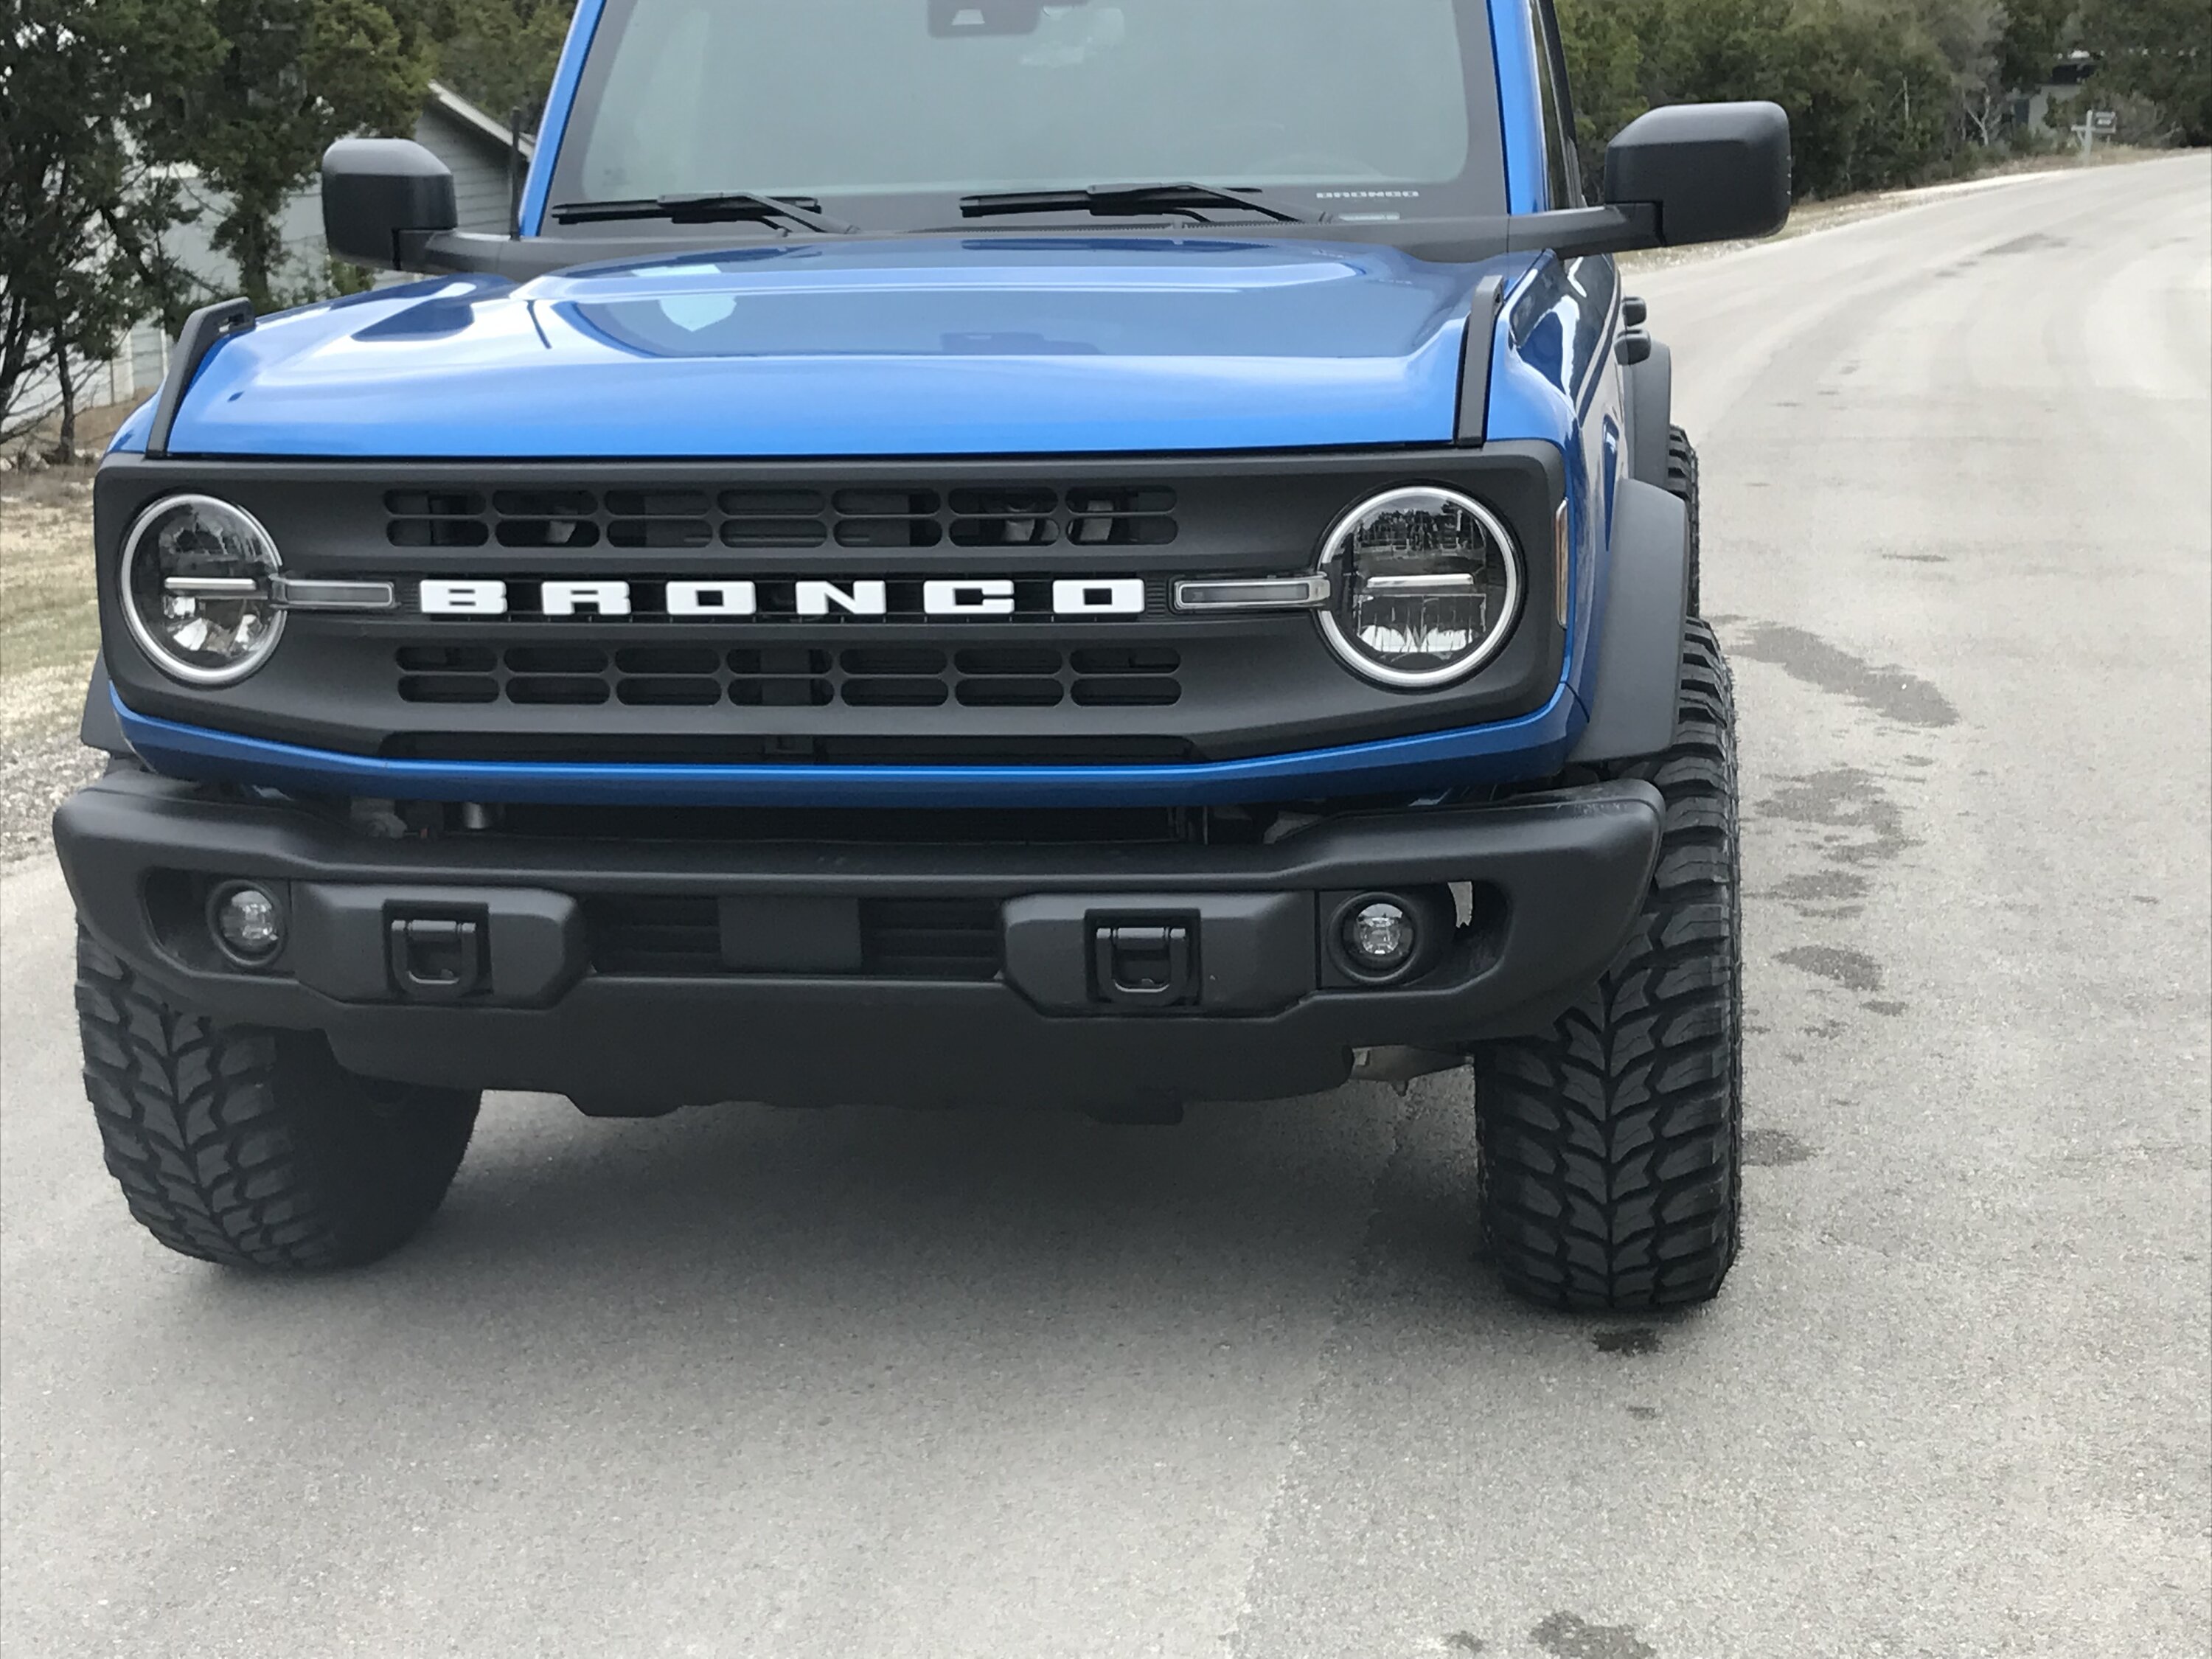 Ford Bronco Pictures of 4 door - with 35's and  no lift ? Which wheels and tires did you choose ? 92D485E2-355E-4A80-918D-64E98289B0E3